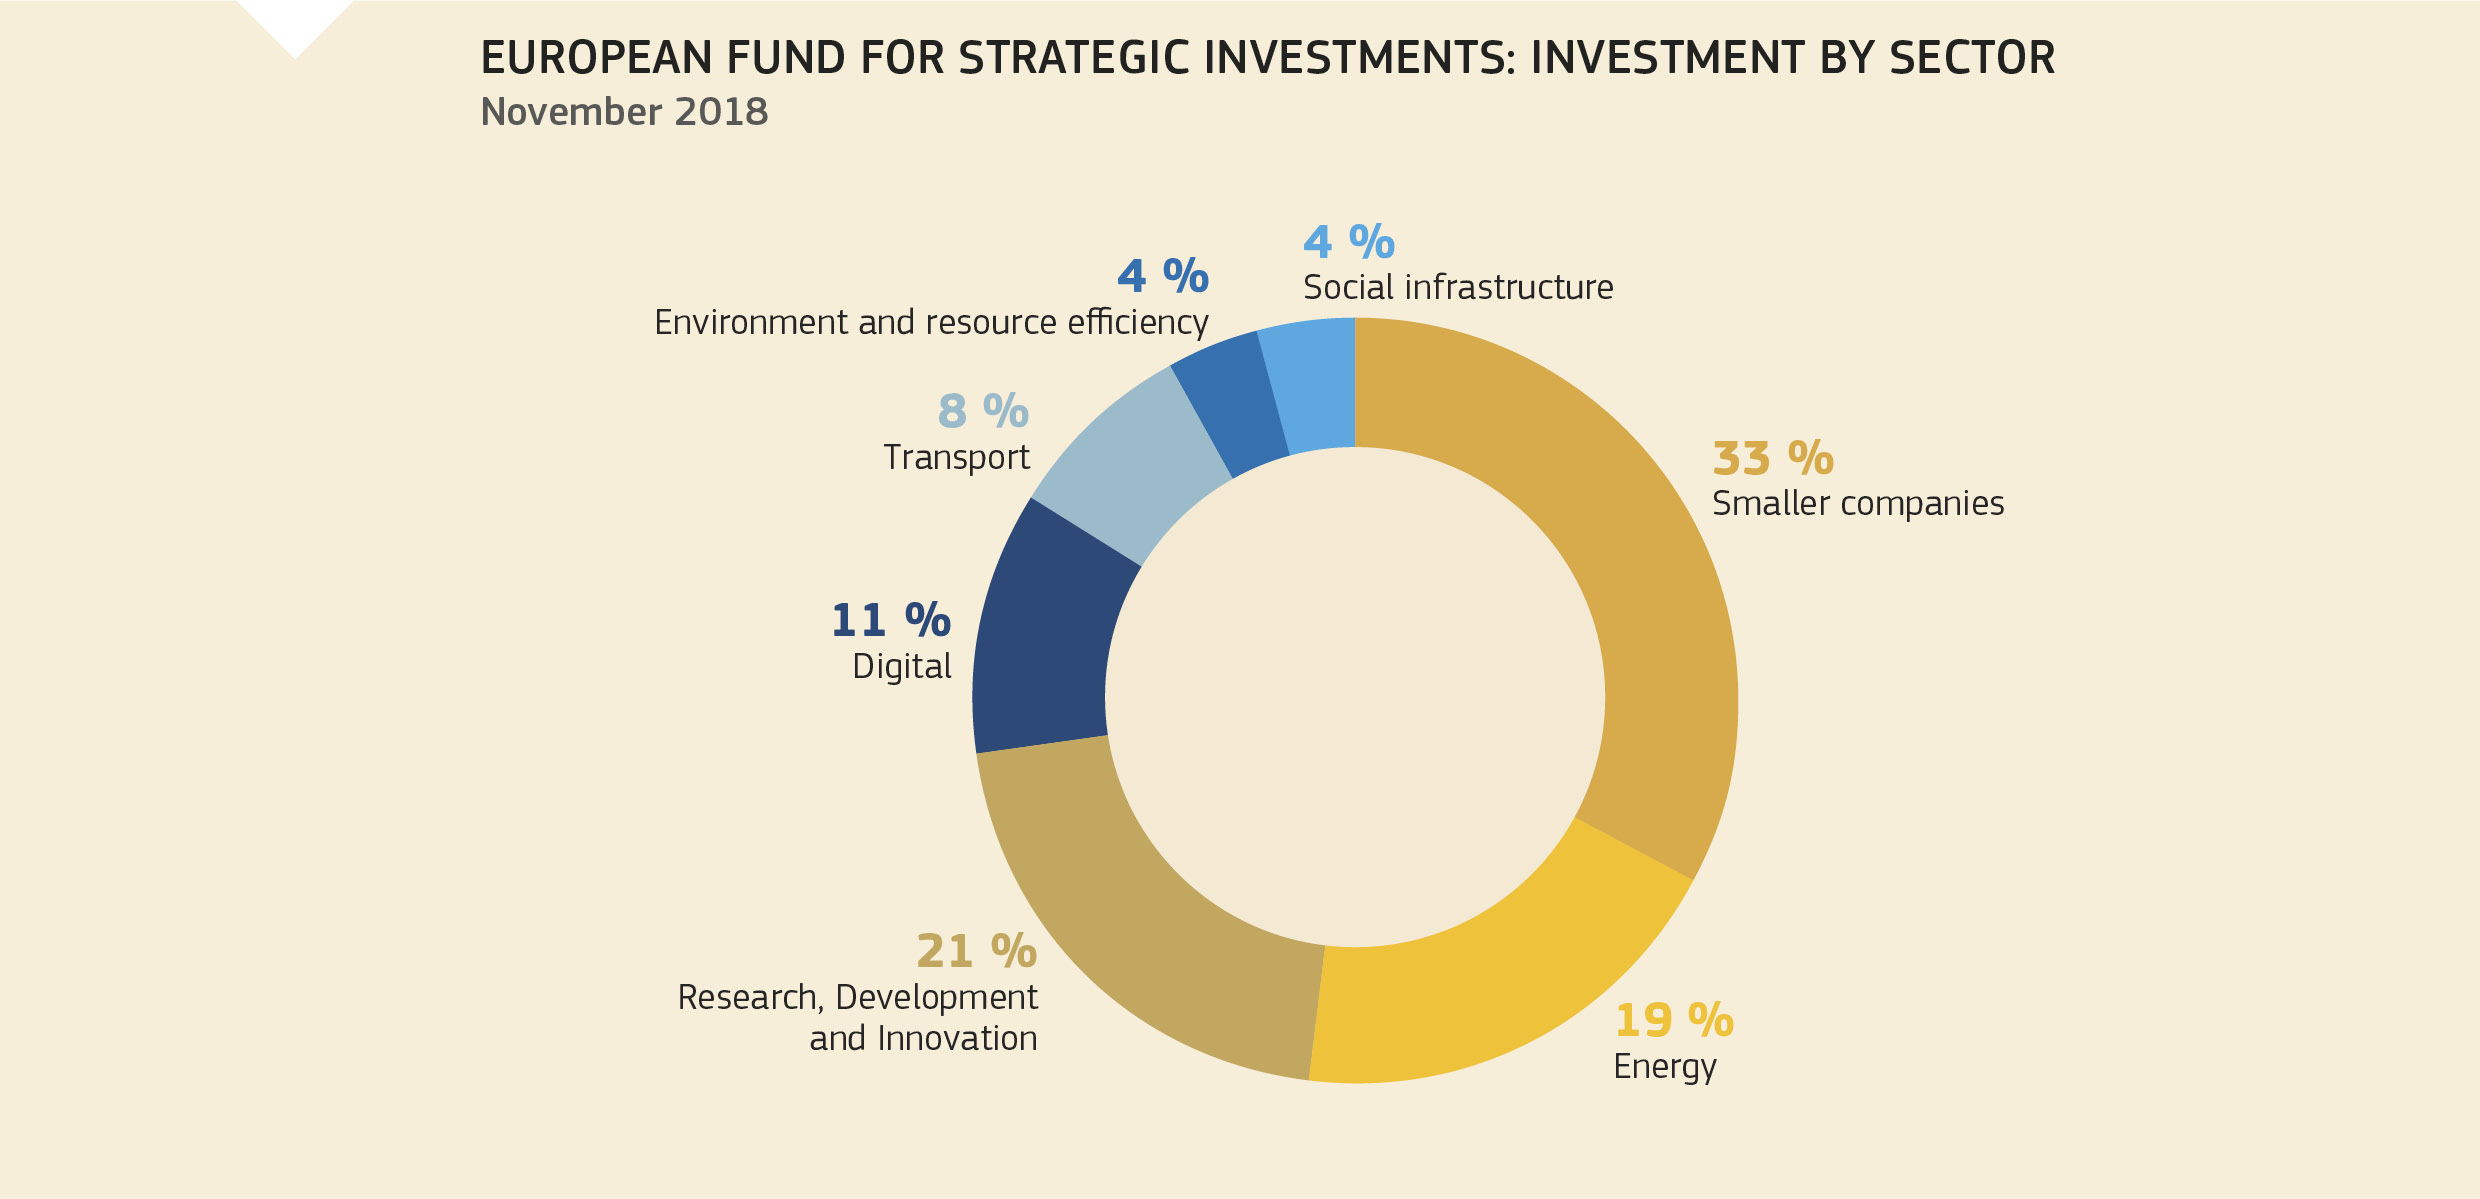 EUROPEAN FUND FOR STRATEGIC INVESTMENTS: INVESTMENT BY SECTOR